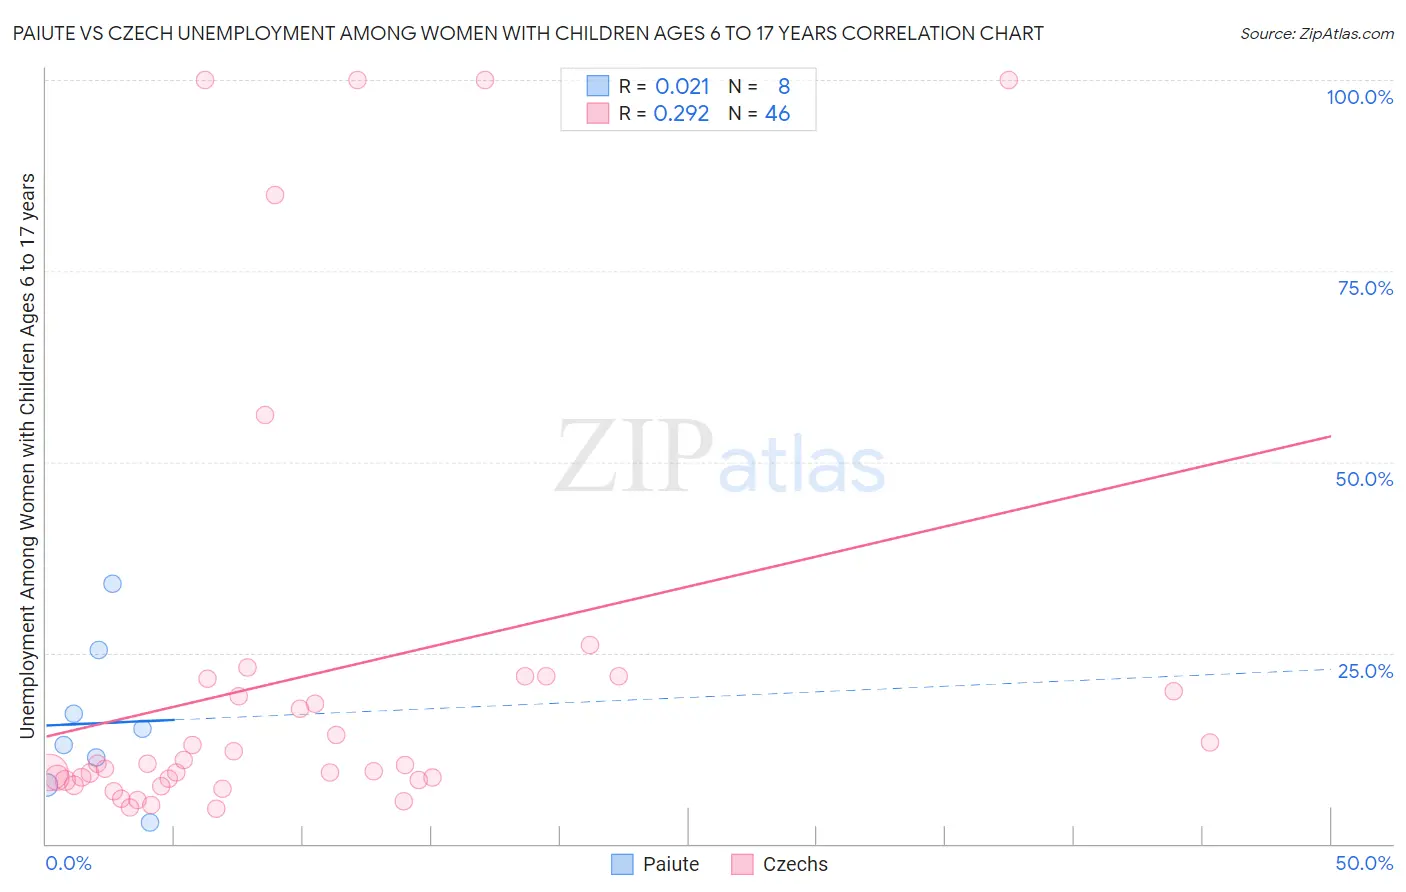 Paiute vs Czech Unemployment Among Women with Children Ages 6 to 17 years